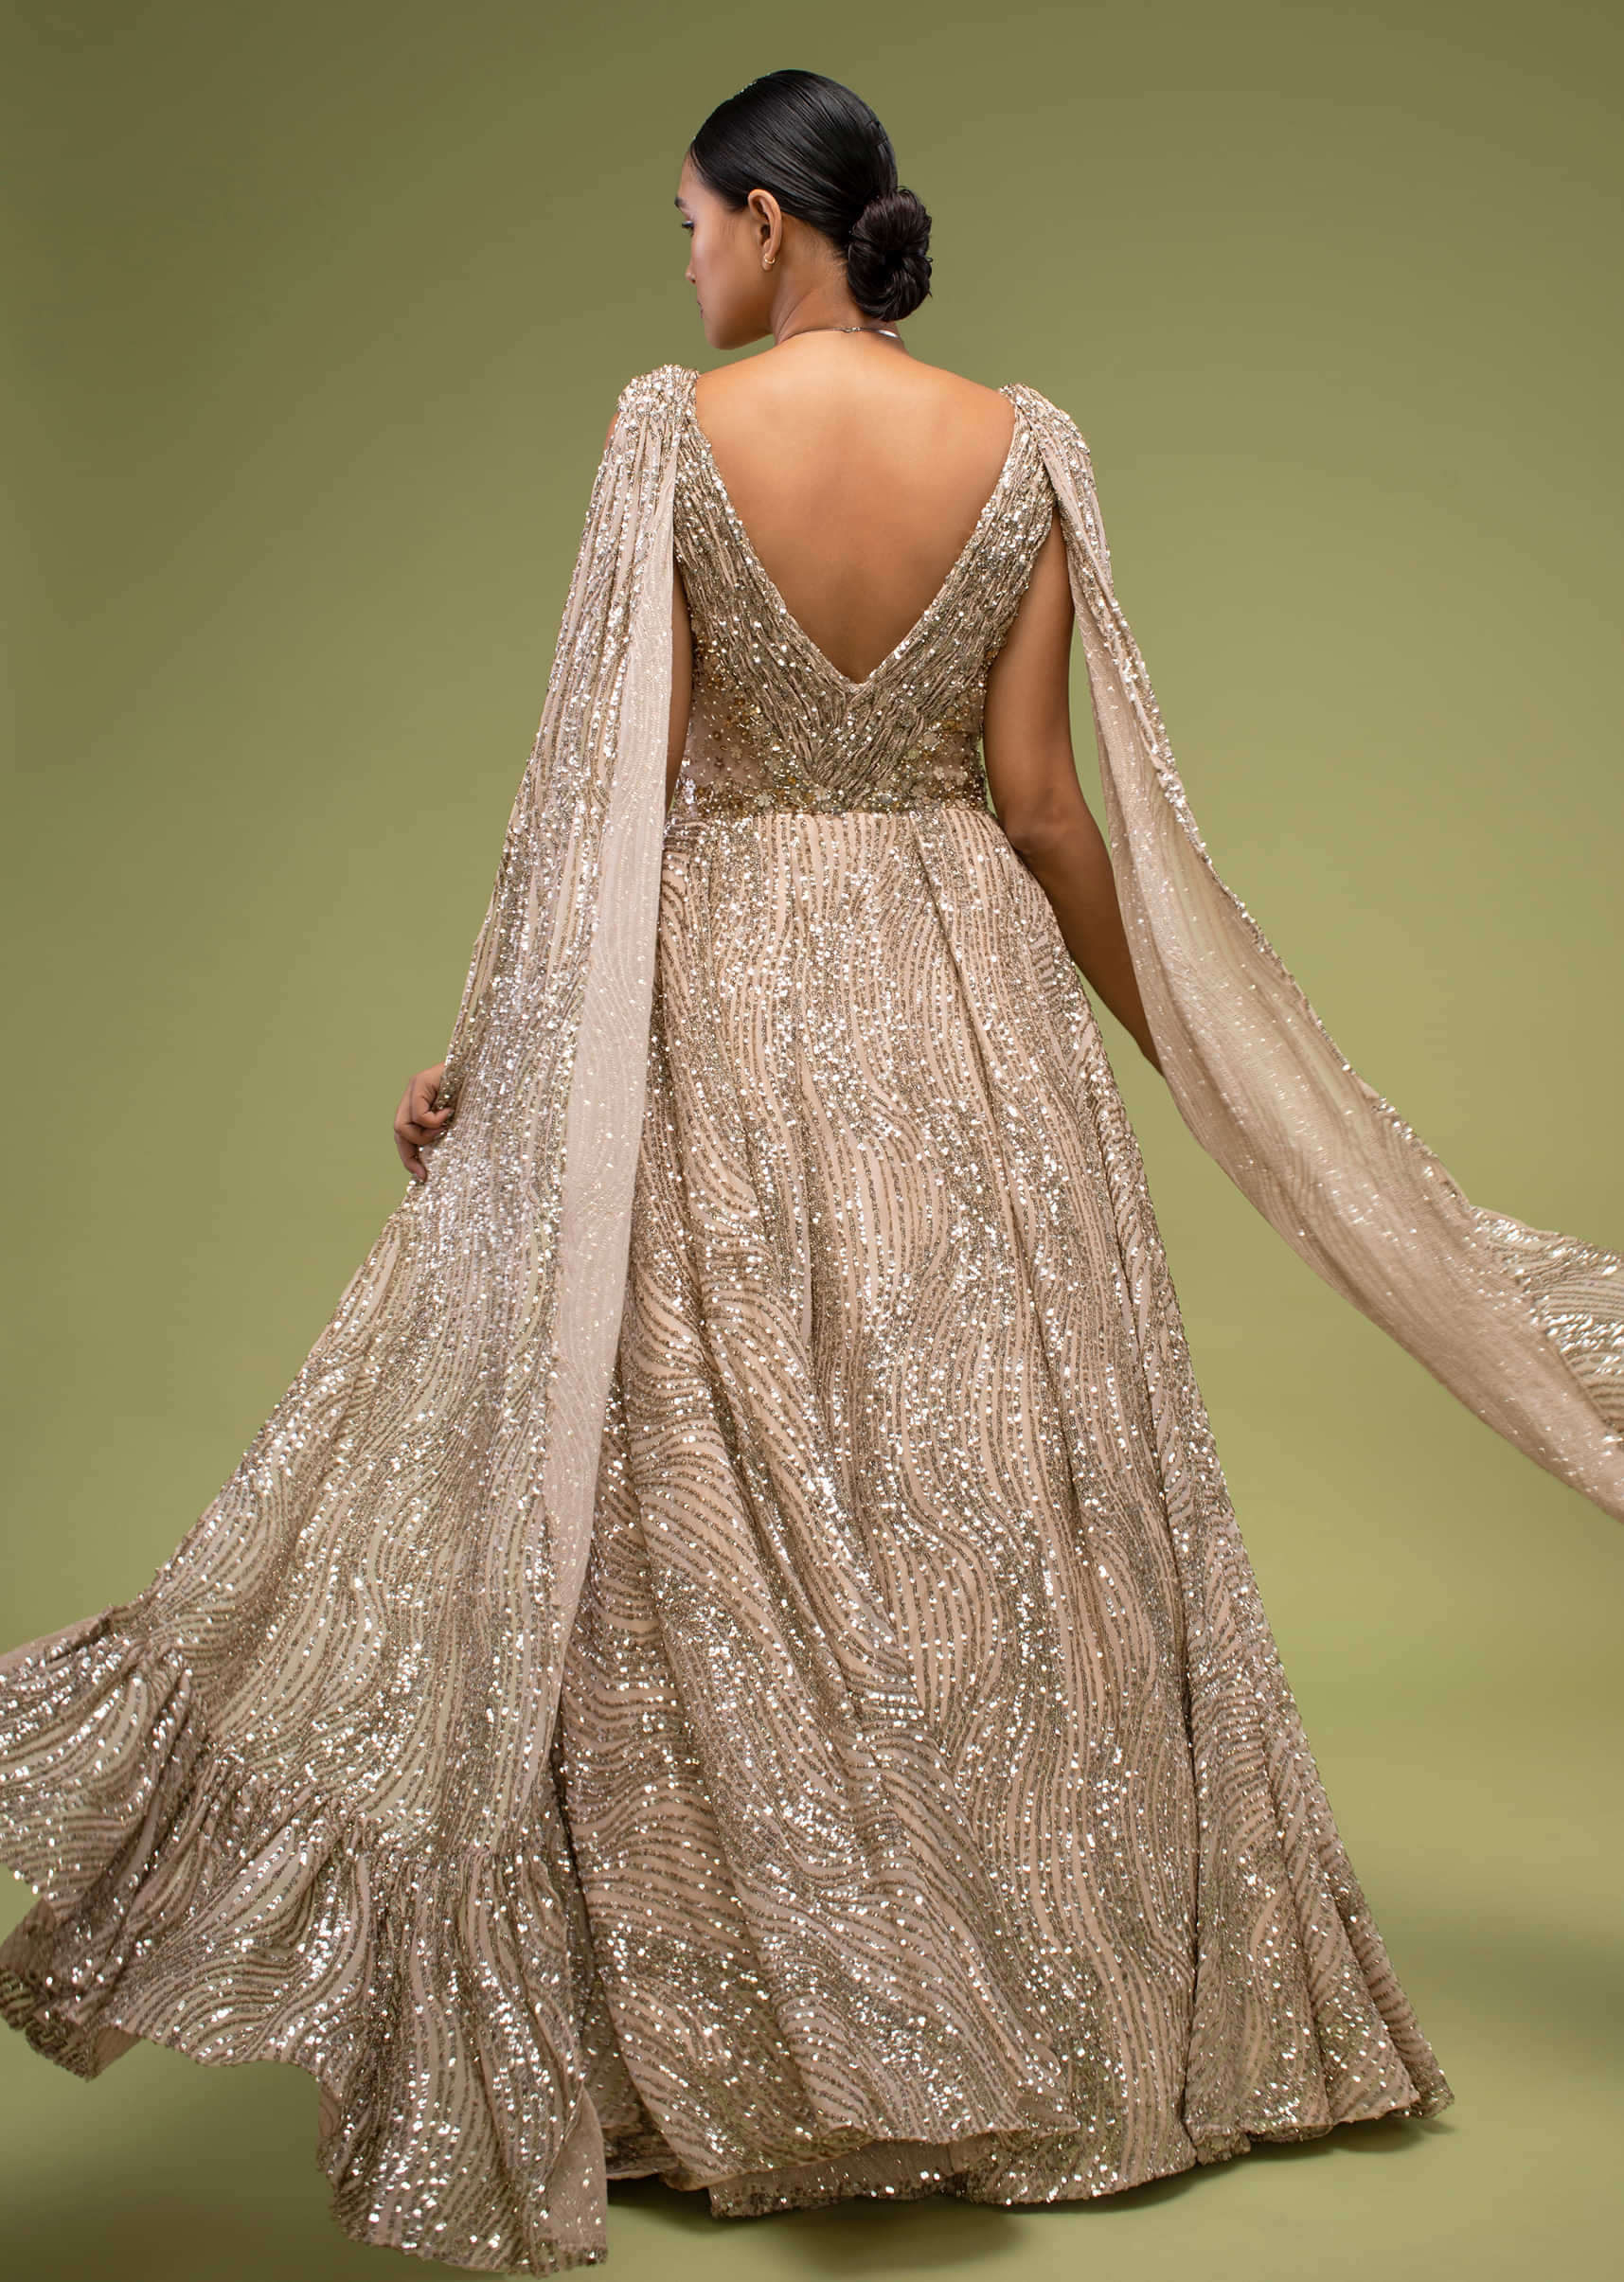 Doe Gown With A Long Cape In Sequins Embroidery, Crafted In Sleeveless With A V Neckline And A Side Zip Closure